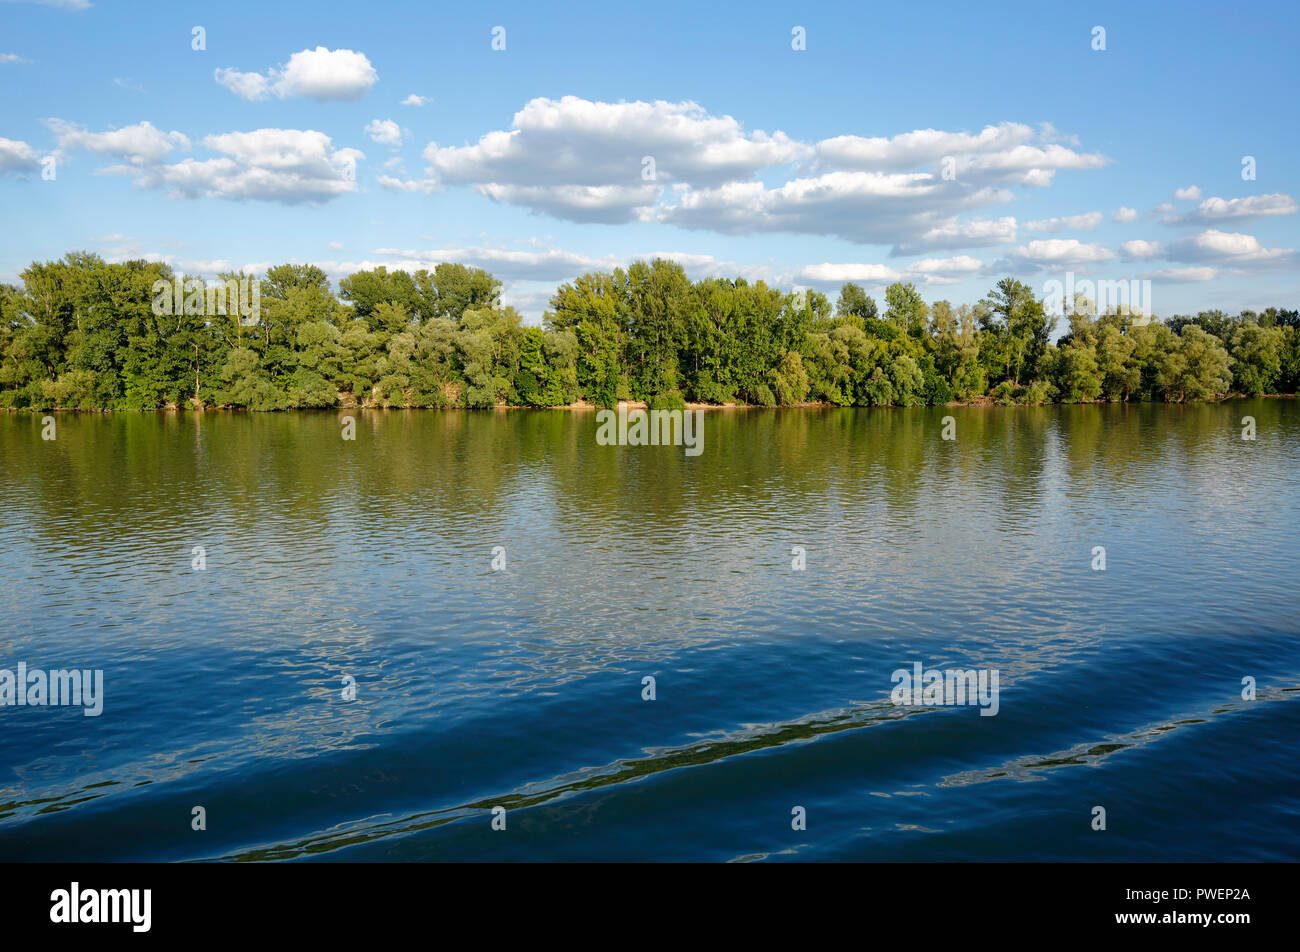 Danube landscape in northern Budapest, river landscape, Danube bank, woodland, evening, cumulus clouds, Hungary, Central Hungary, Capital City, UNESCO World Heritage Site Stock Photo